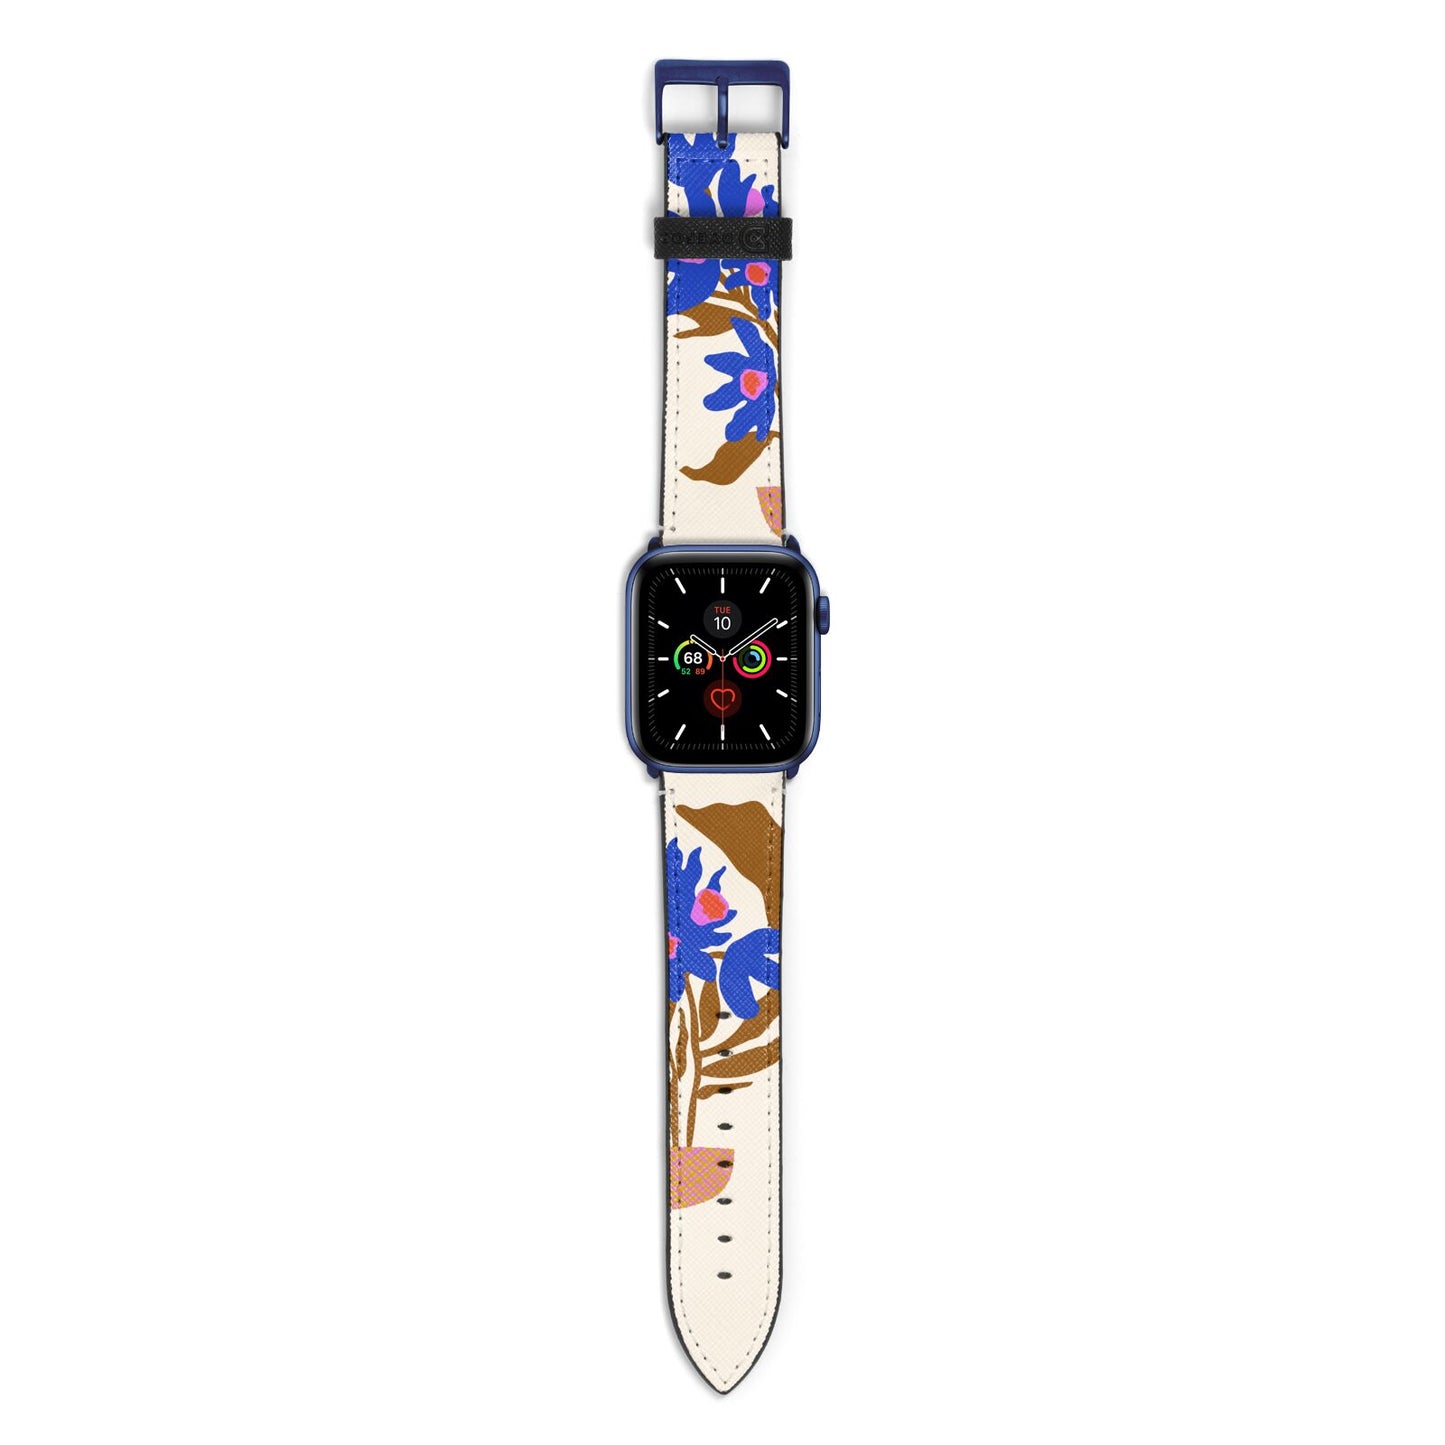 Flowers in a Vase Apple Watch Strap with Blue Hardware